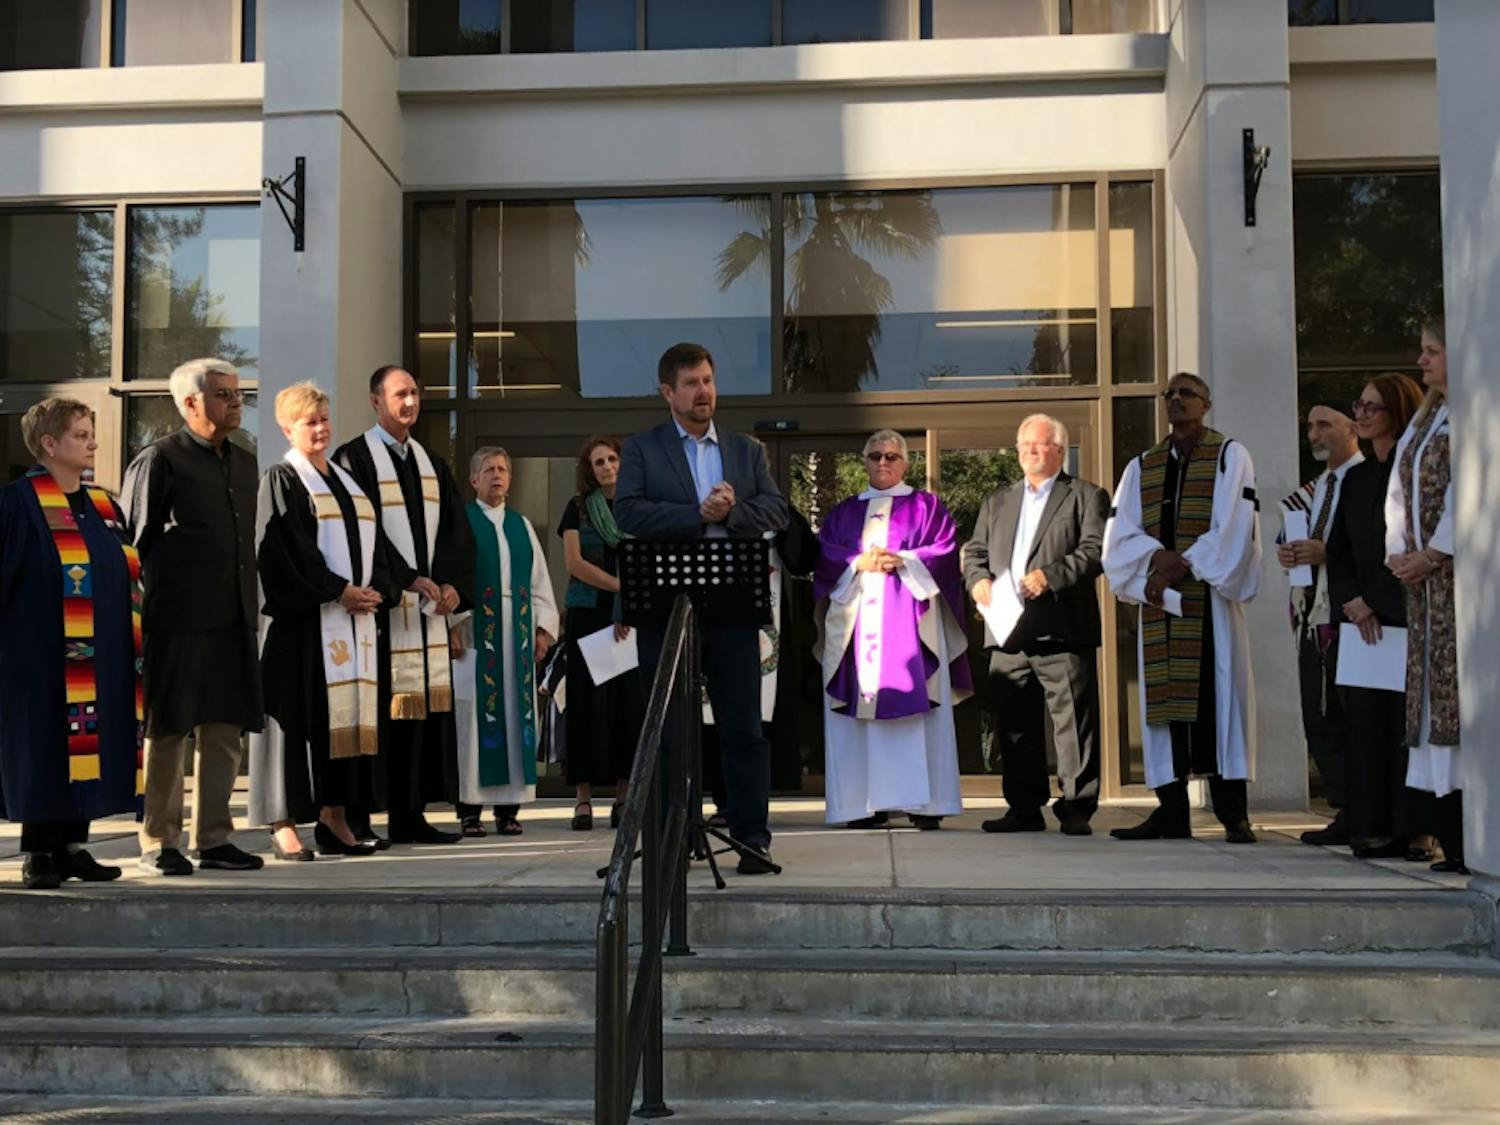 Mayor Lauren Poe calls on a crowd of 30 people to denounce hate speech and anti-semitism Tuesday afternoon outside of City Hall. When one person is harmed, it takes a toll on everyone, he said. 